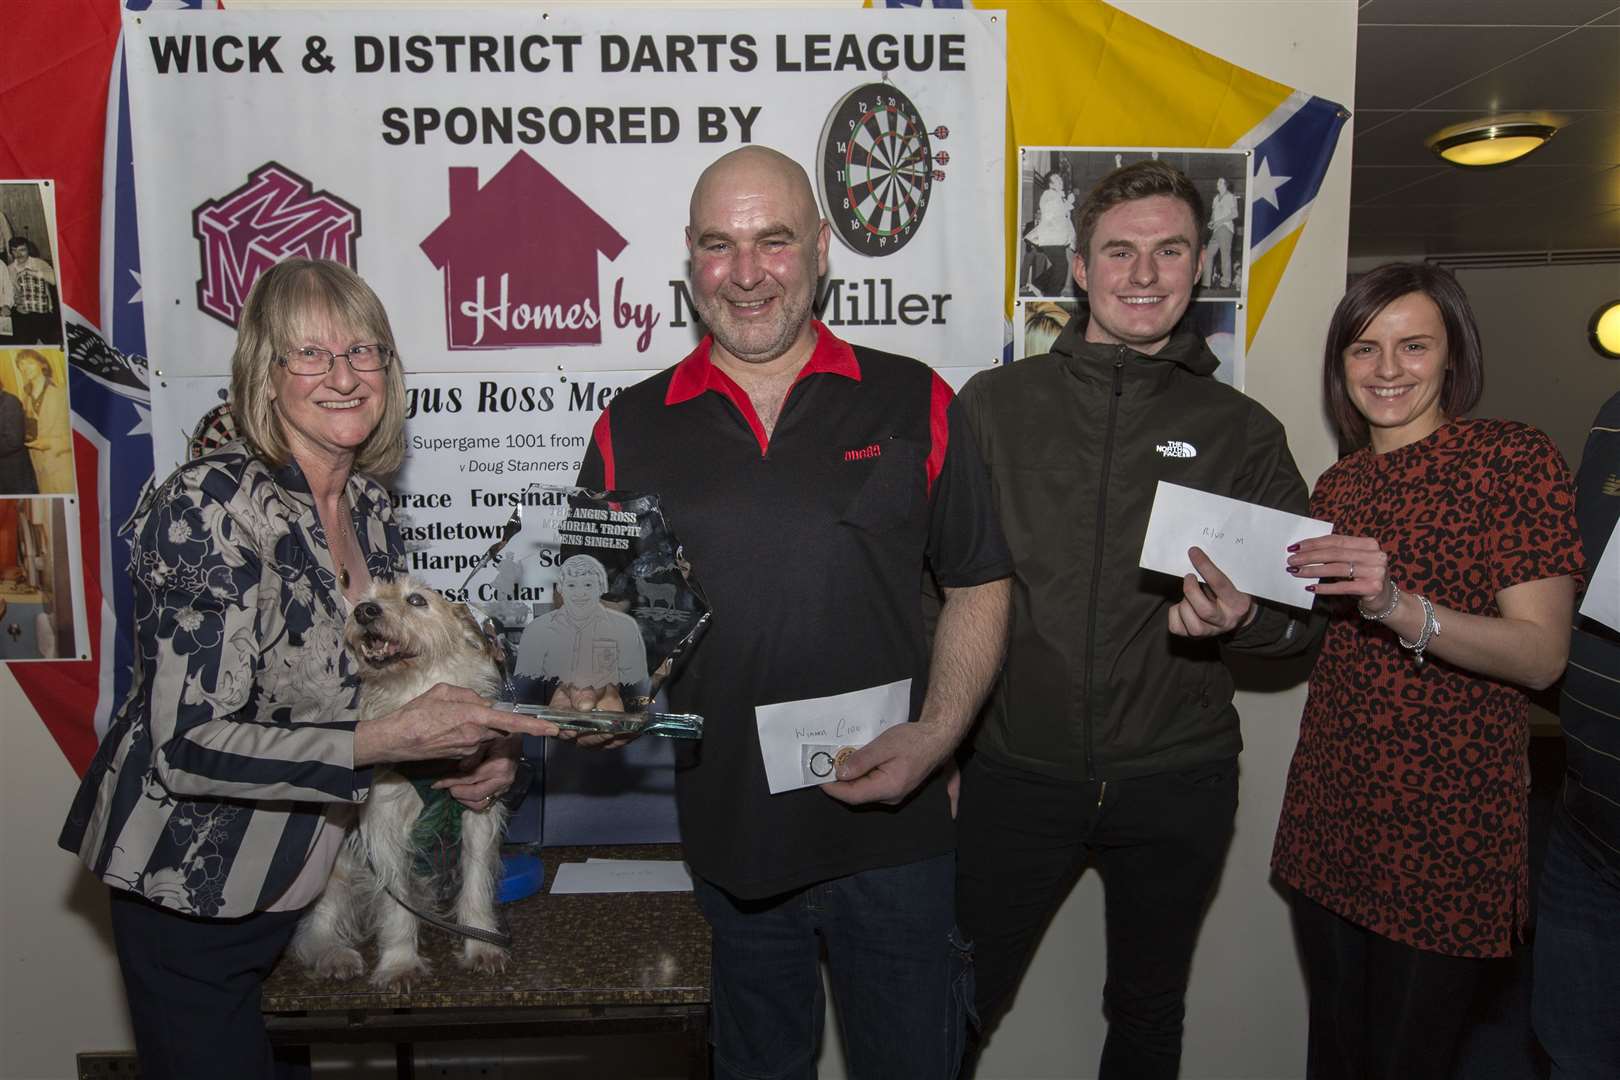 Seaview's Kevin Macgregor, winner of the men's section of the Angus Ross memorial competition, receives his trophy from Angus's widow Marina, accompanied by his dog Jocky. The runner-up was Damon Meikle (Seaforth) who received his prize from Nicola Sinclair on behalf of Harper's Bar. Picture: Robert MacDonald / Northern Studios